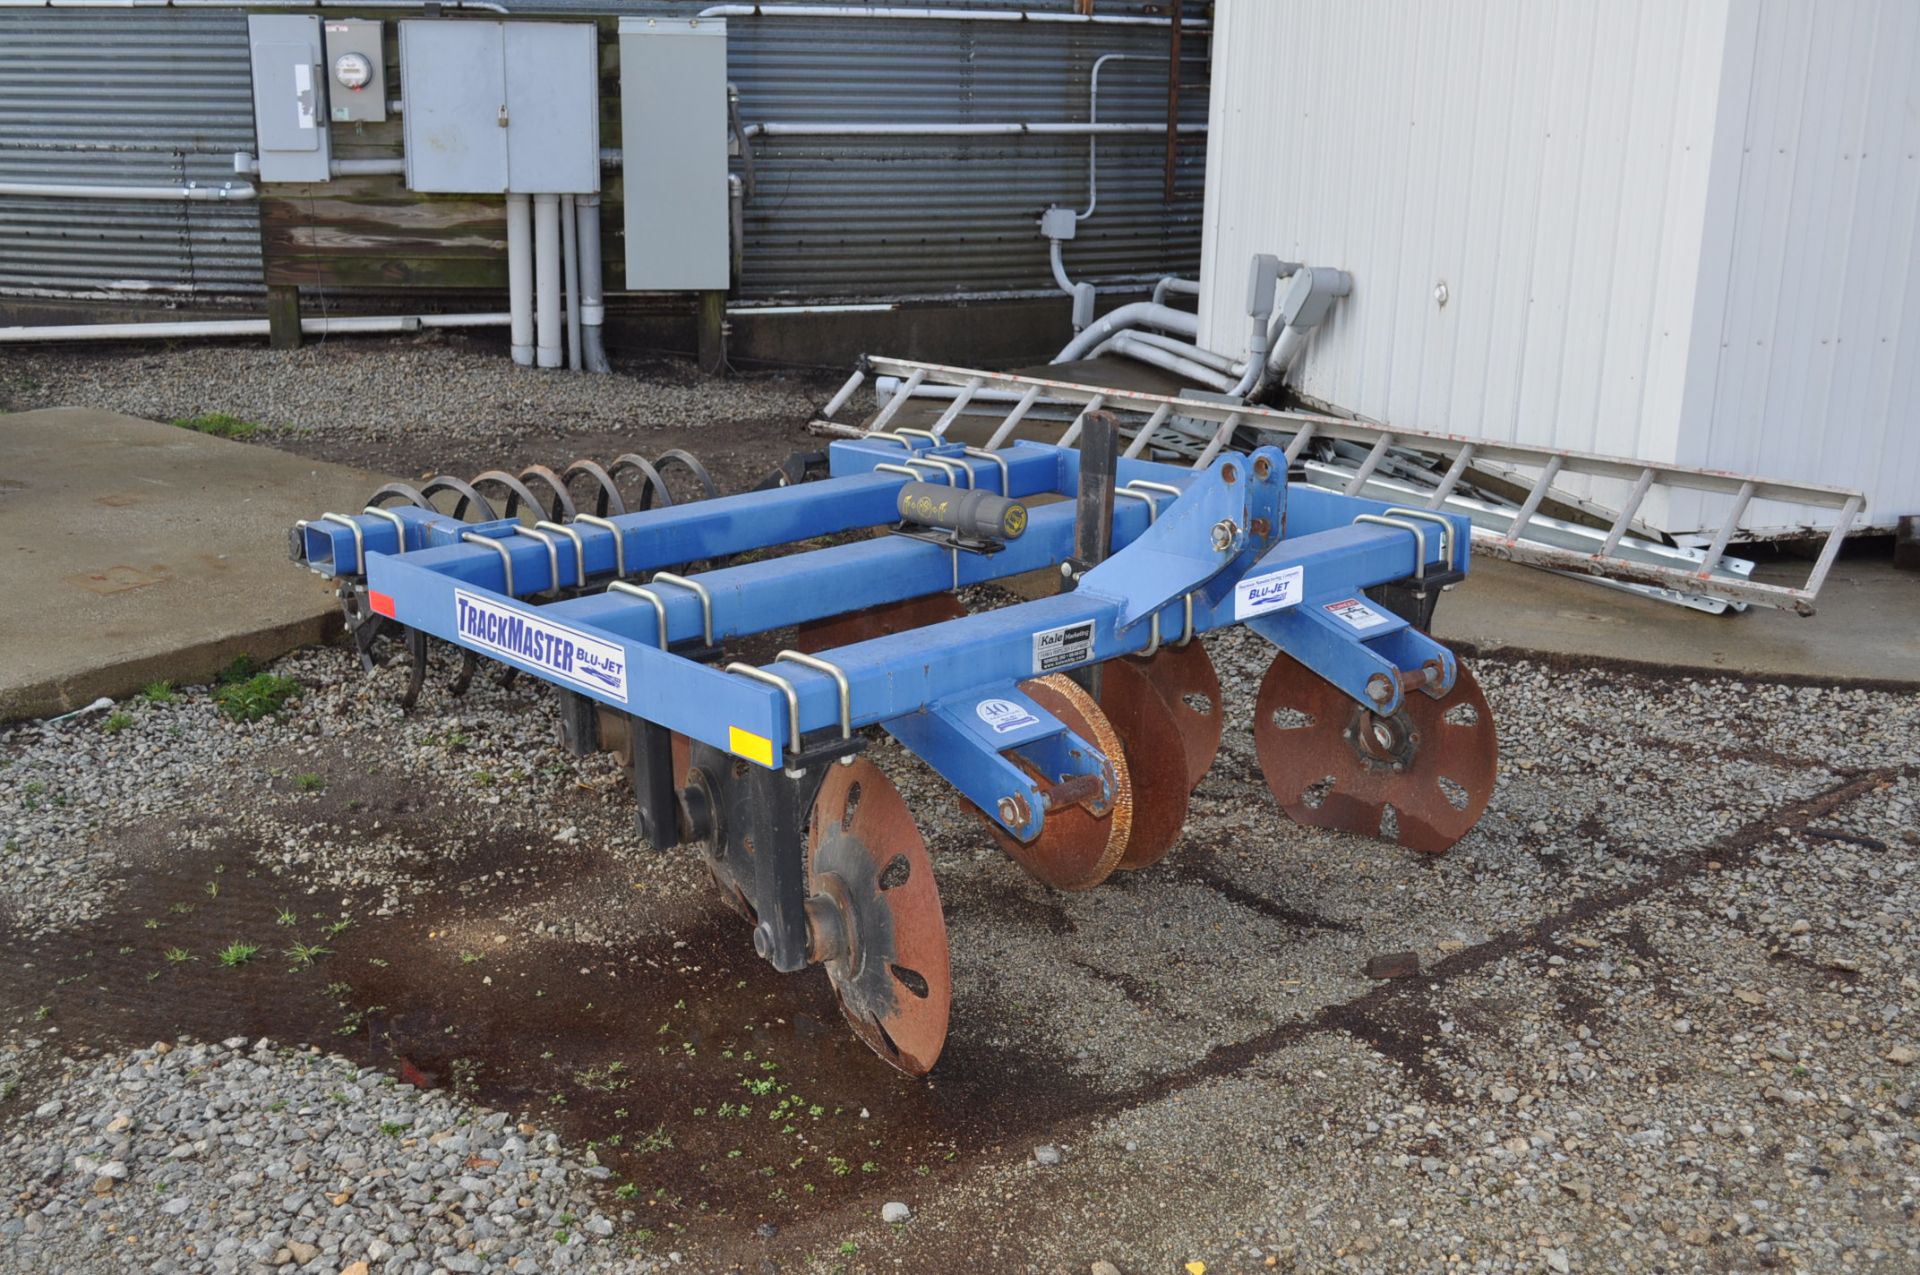 Blu-Jet Trackmaster trench filler, 3 point hitch